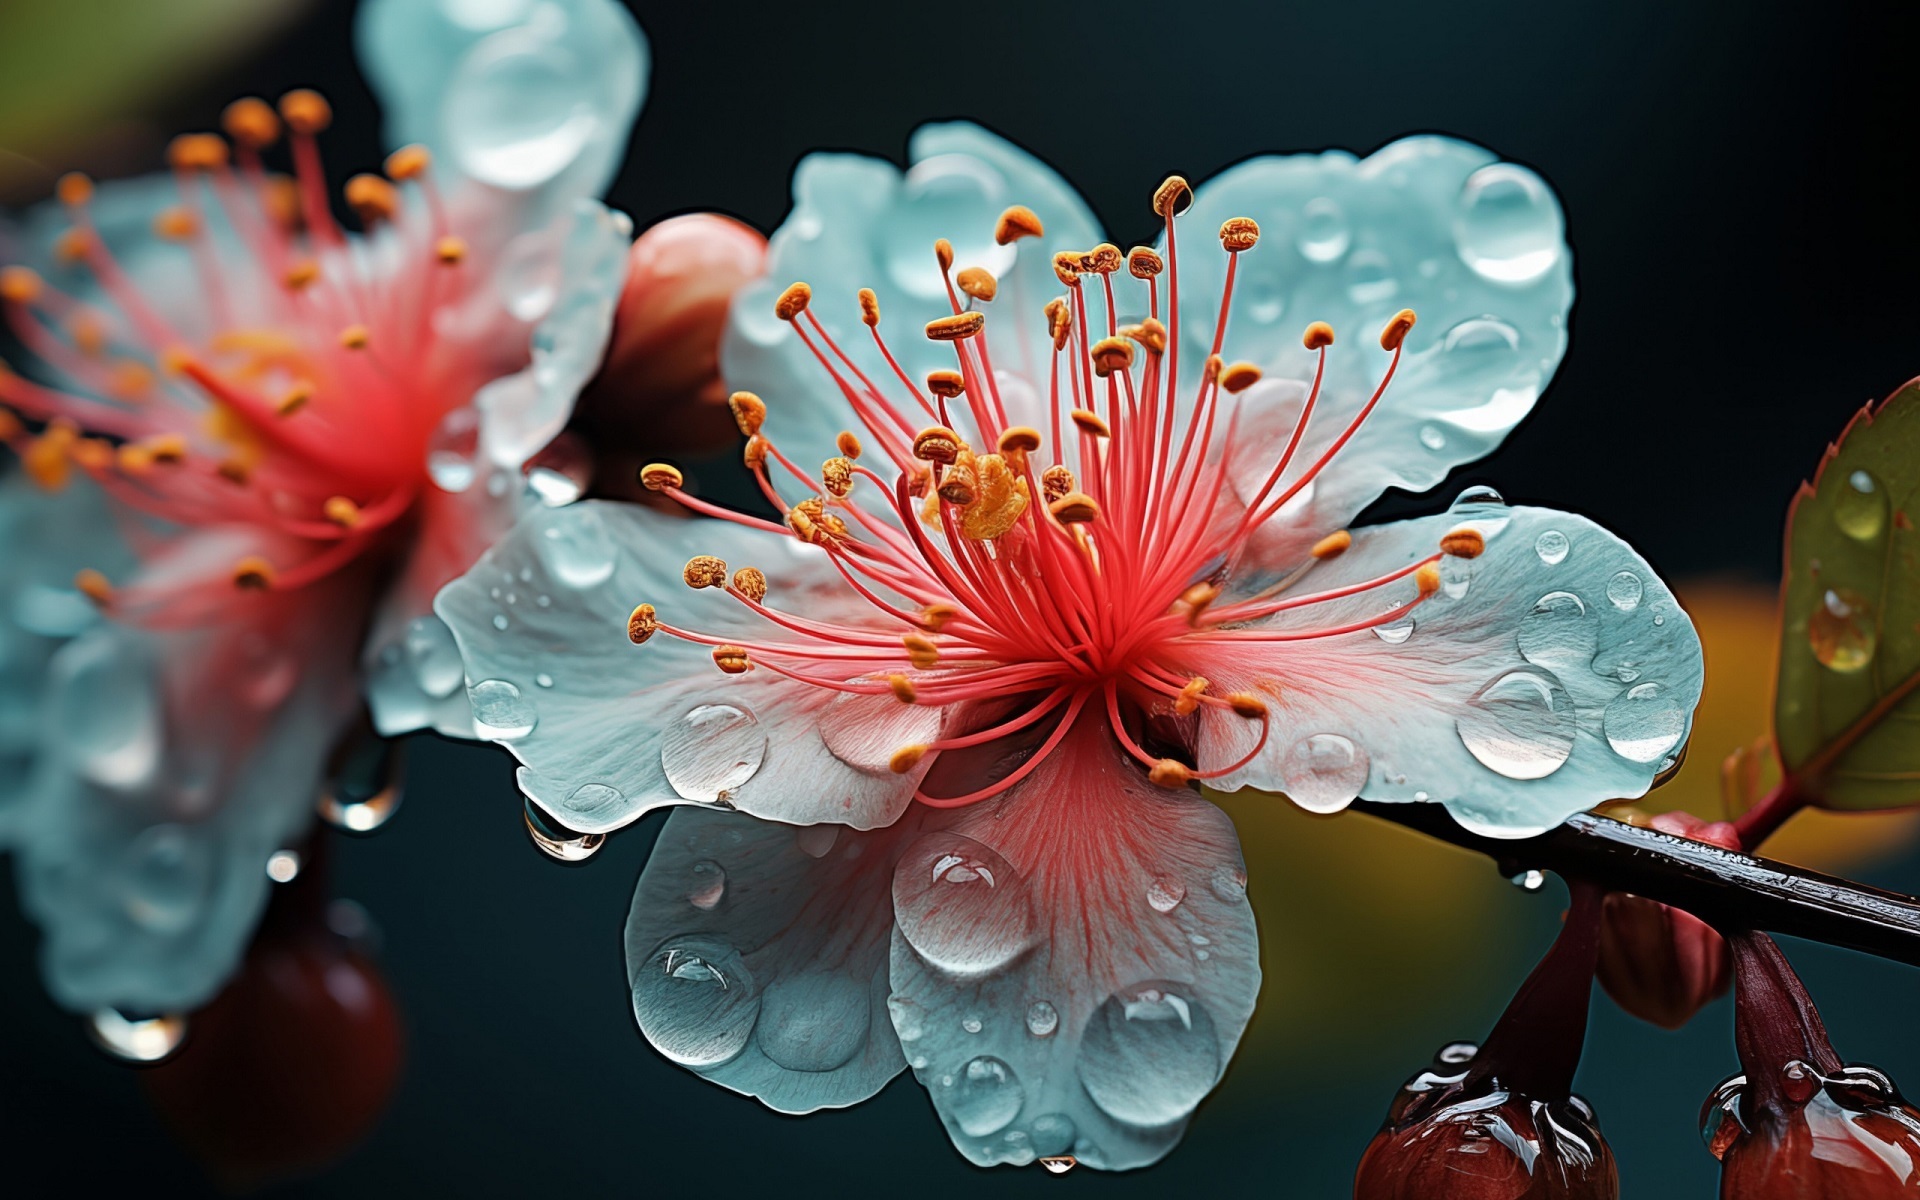 Dewdrops on flowers